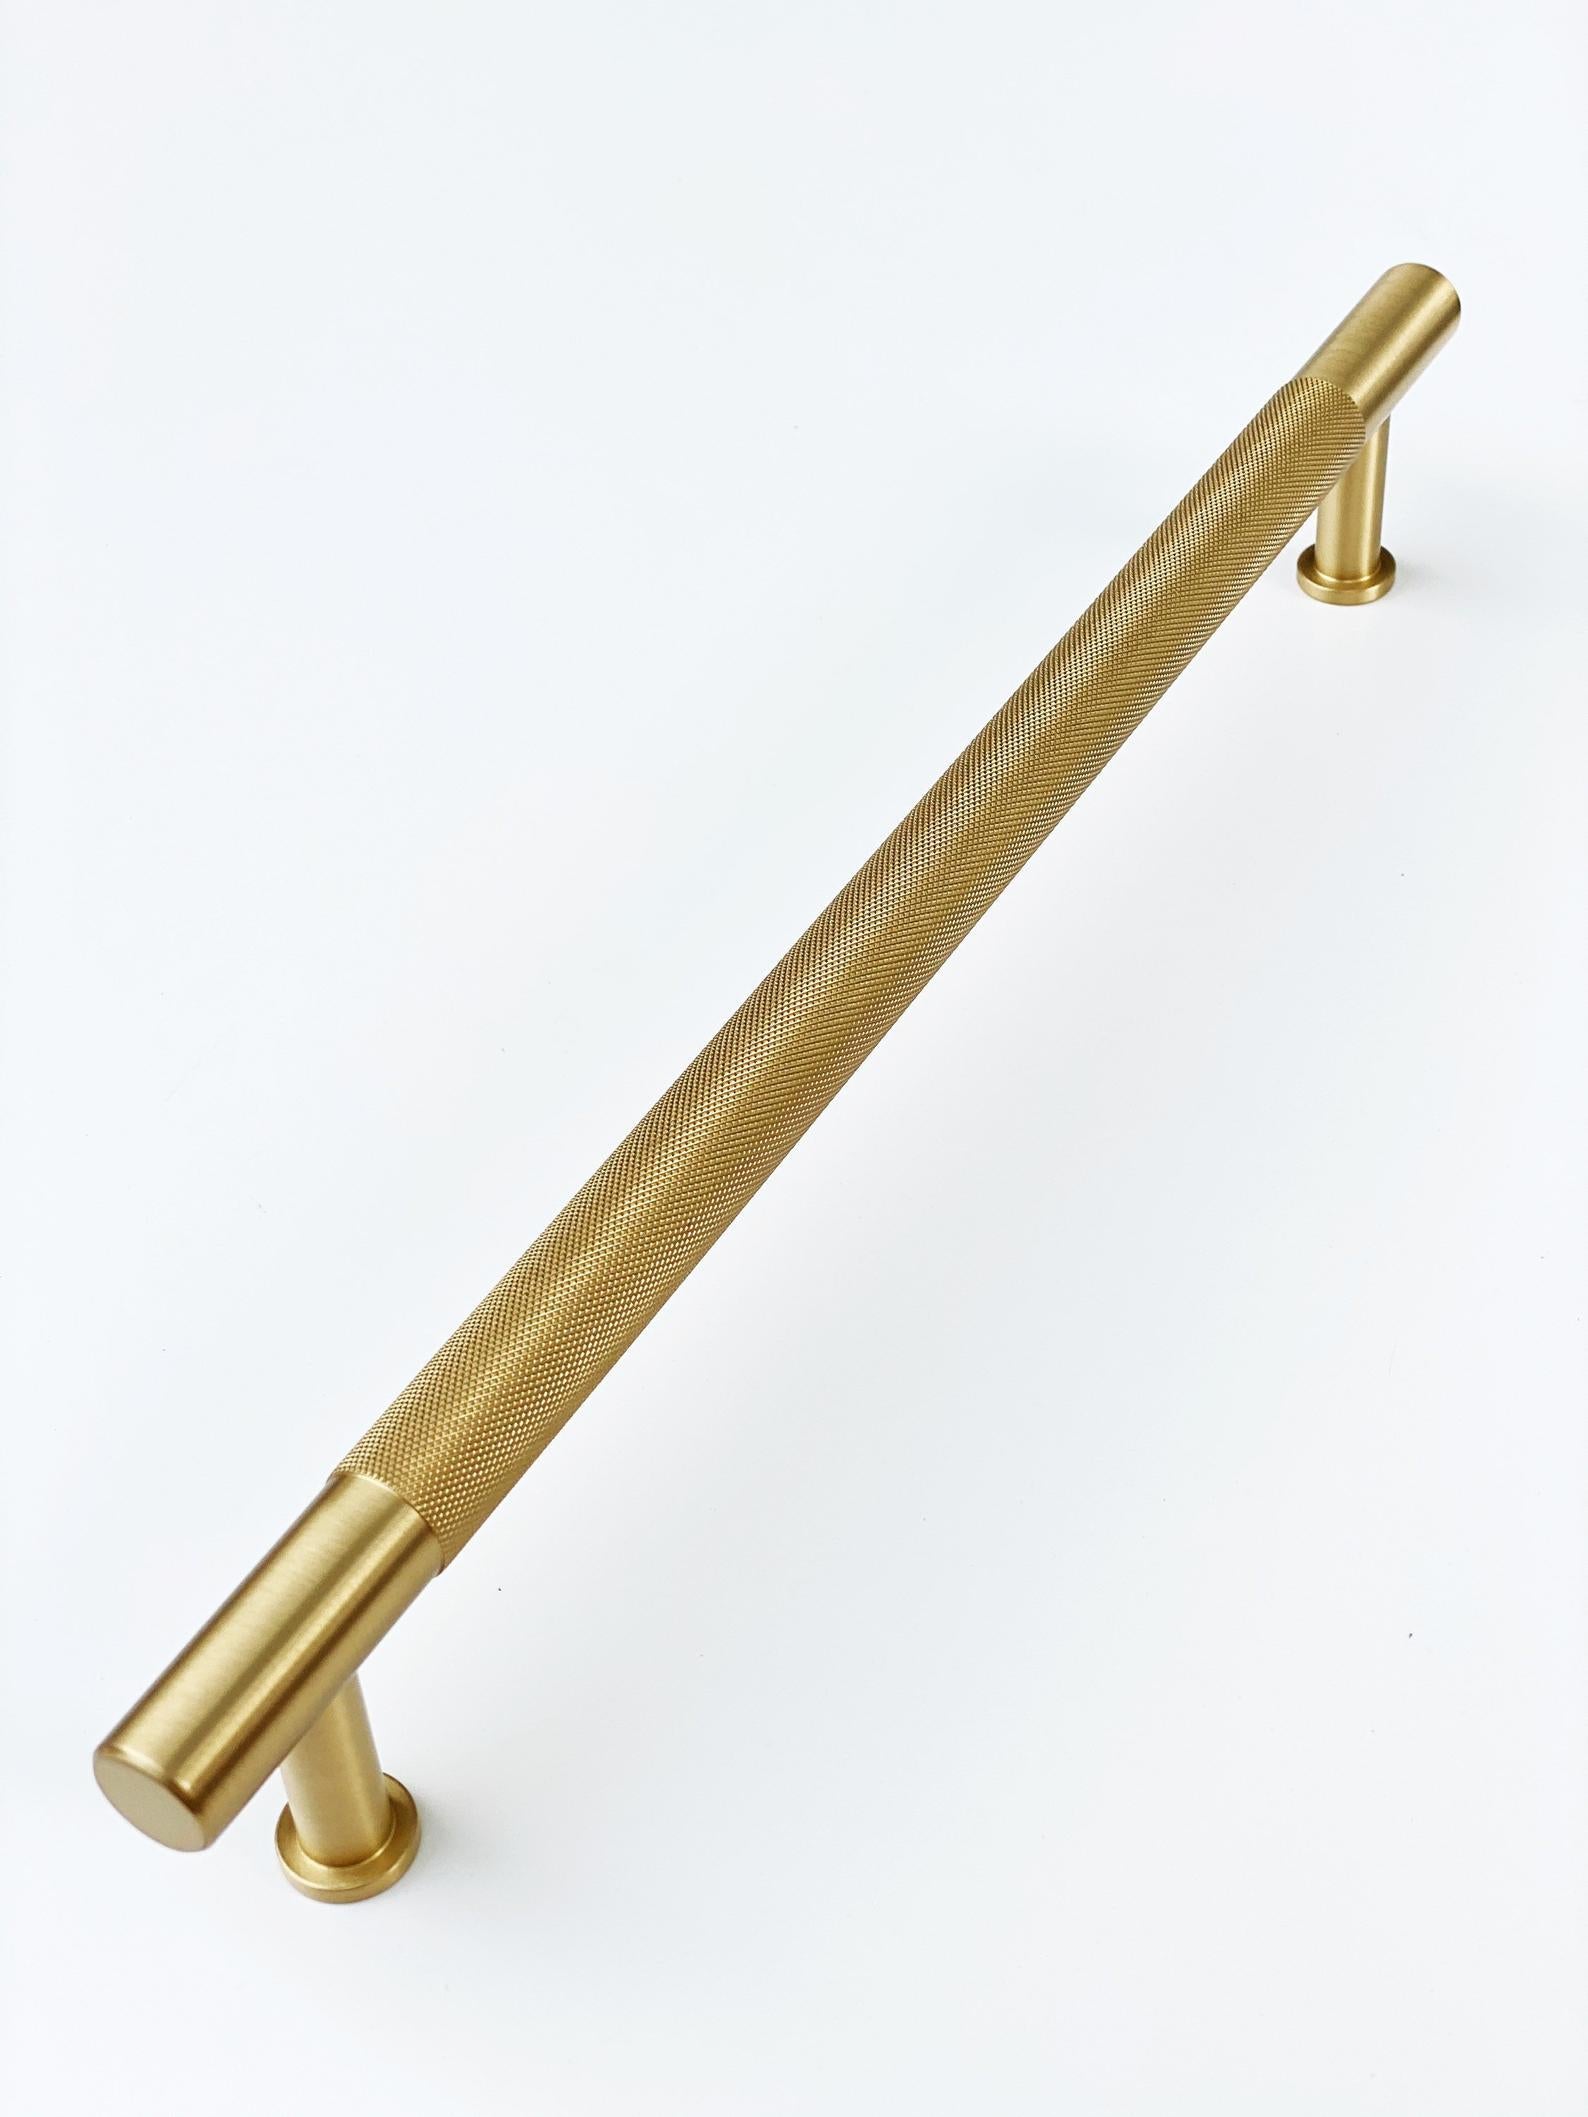 Brass Solid "Texture No.2" Knurled Drawer Pulls and Knobs in Satin Brass | Pulls